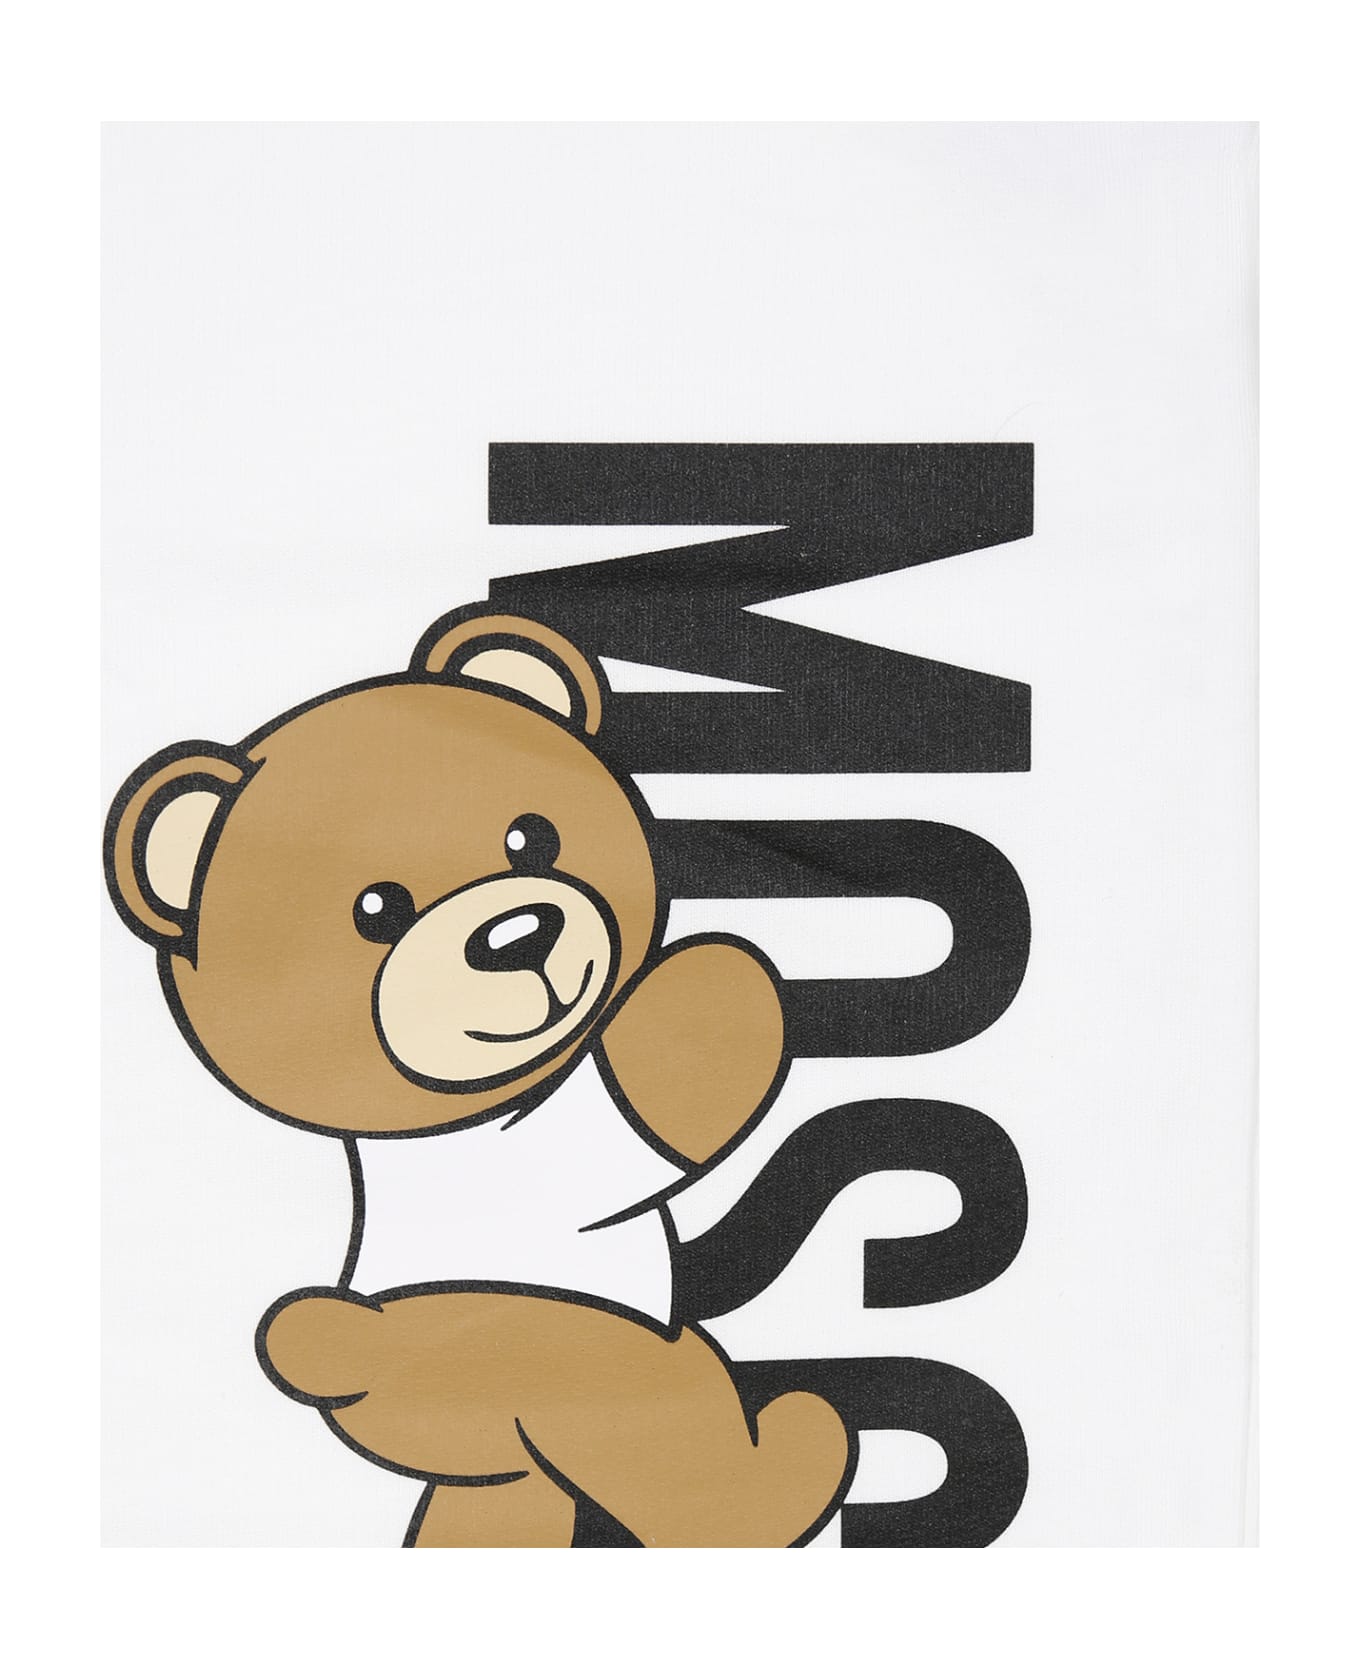 Moschino White Blanket For Baby Boy With Teddy Bear And Logo - White アクセサリー＆ギフト